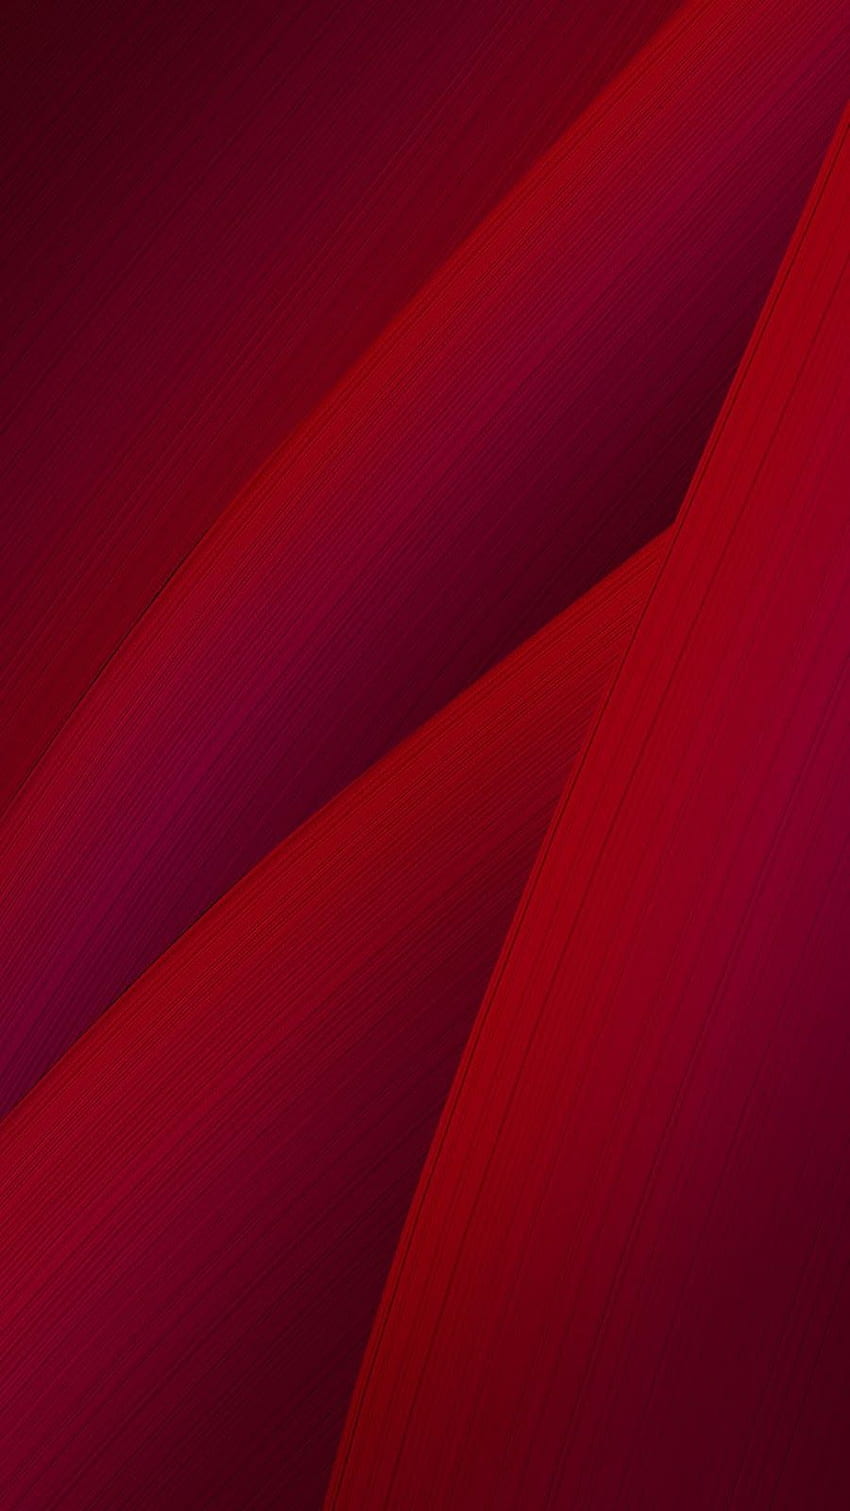 Asus Zenfone 2 Click to enlarge and save it [] for your , Mobile & Tablet. Explore Asus Zenfone 2 . ASUS Full , ASUS Default HD phone wallpaper